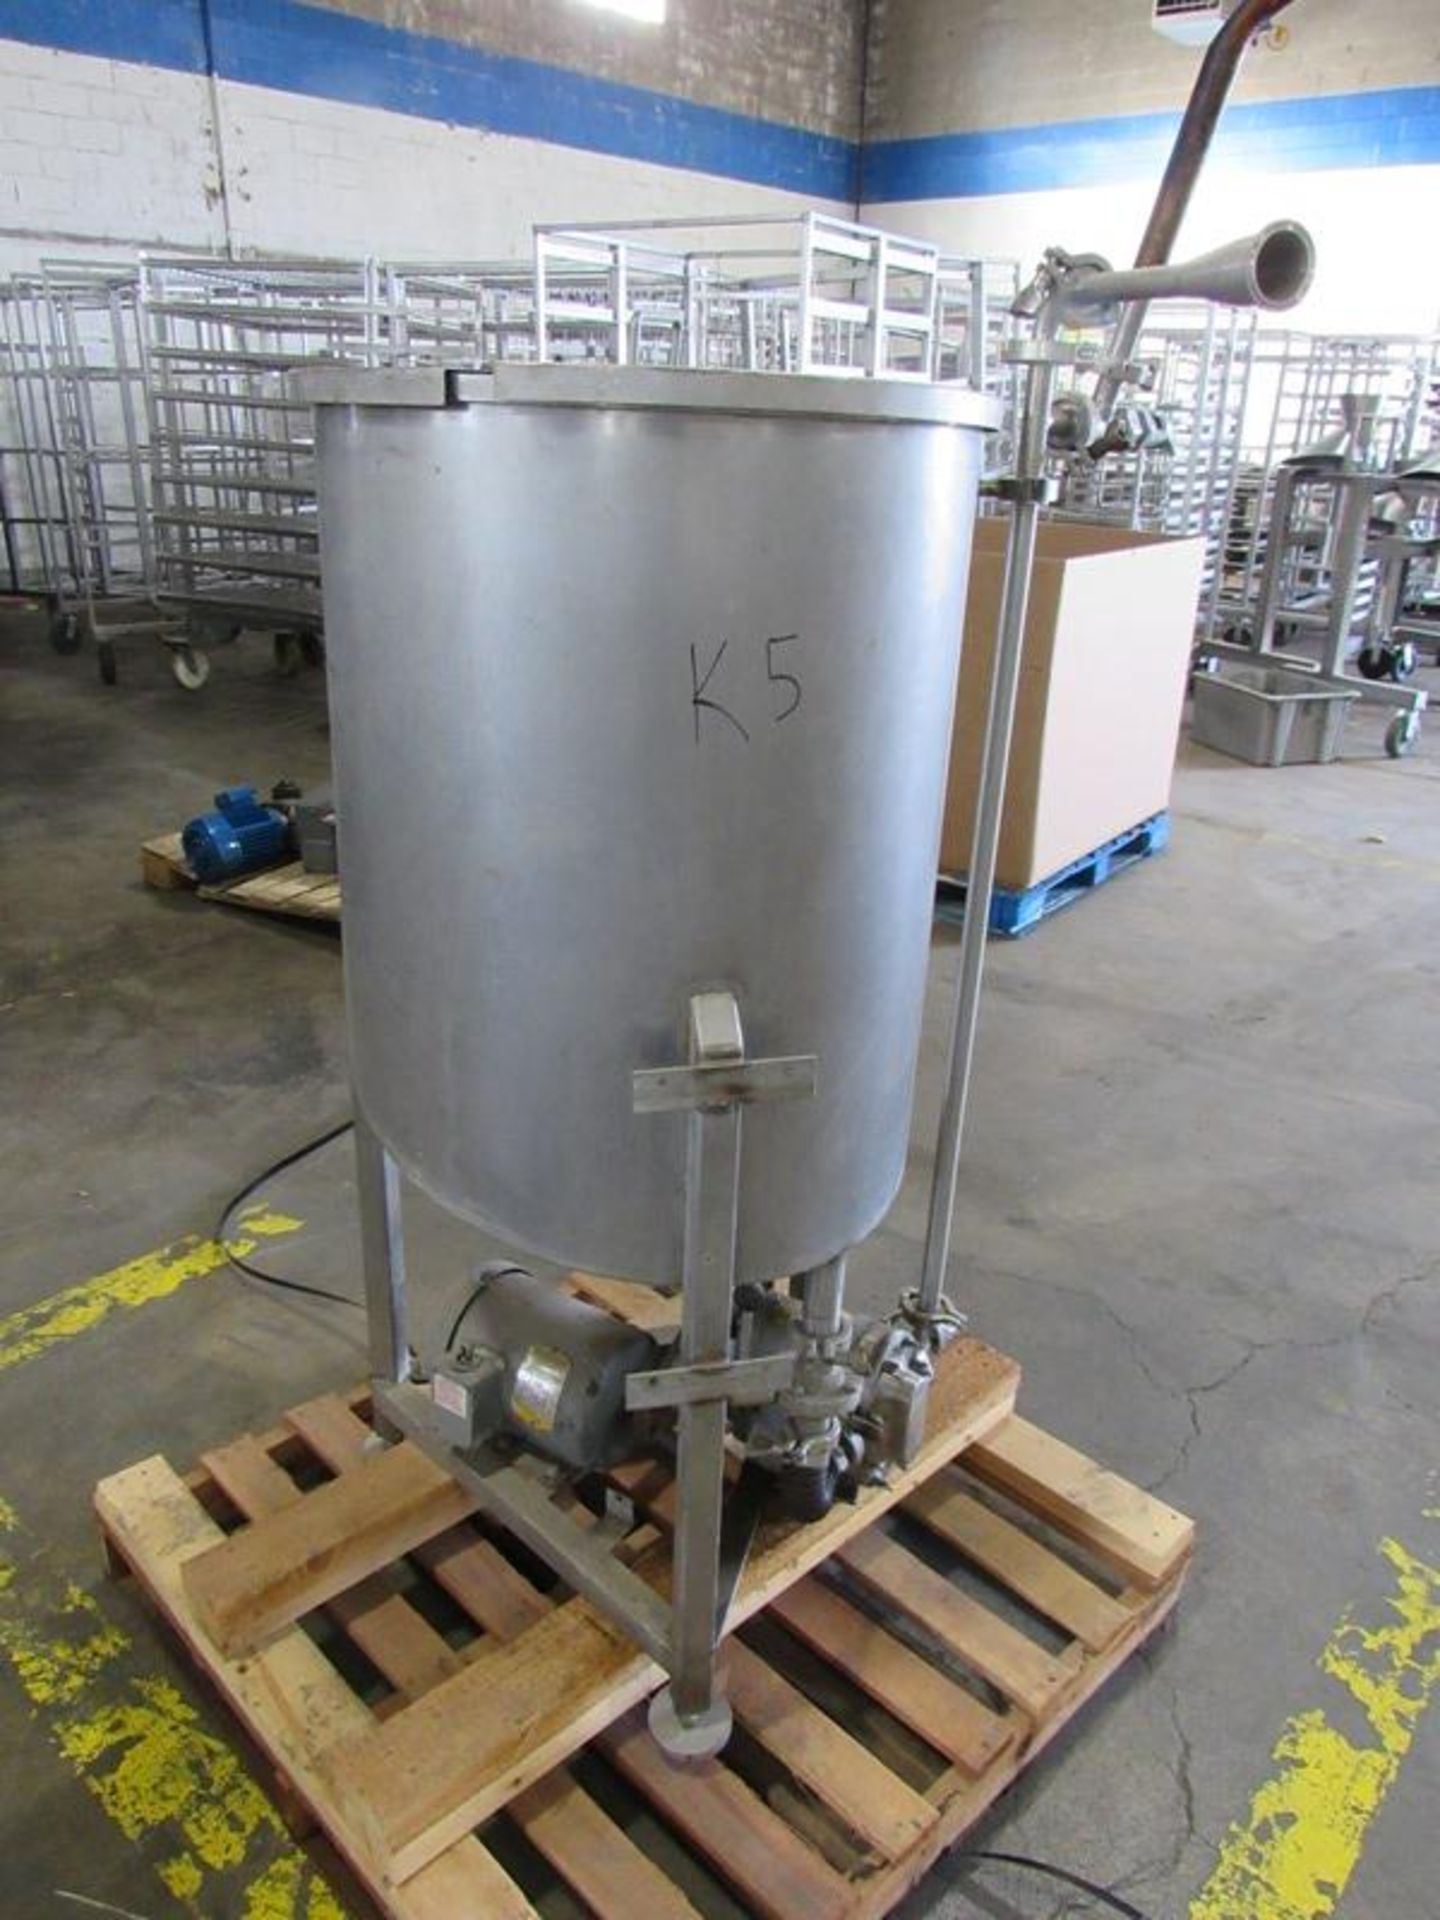 Stainless Steel Tank, 24" dia. X 25" deep, slanted bottom with pump, size 10, Ser. #076748SS, 1/2 - Image 2 of 8